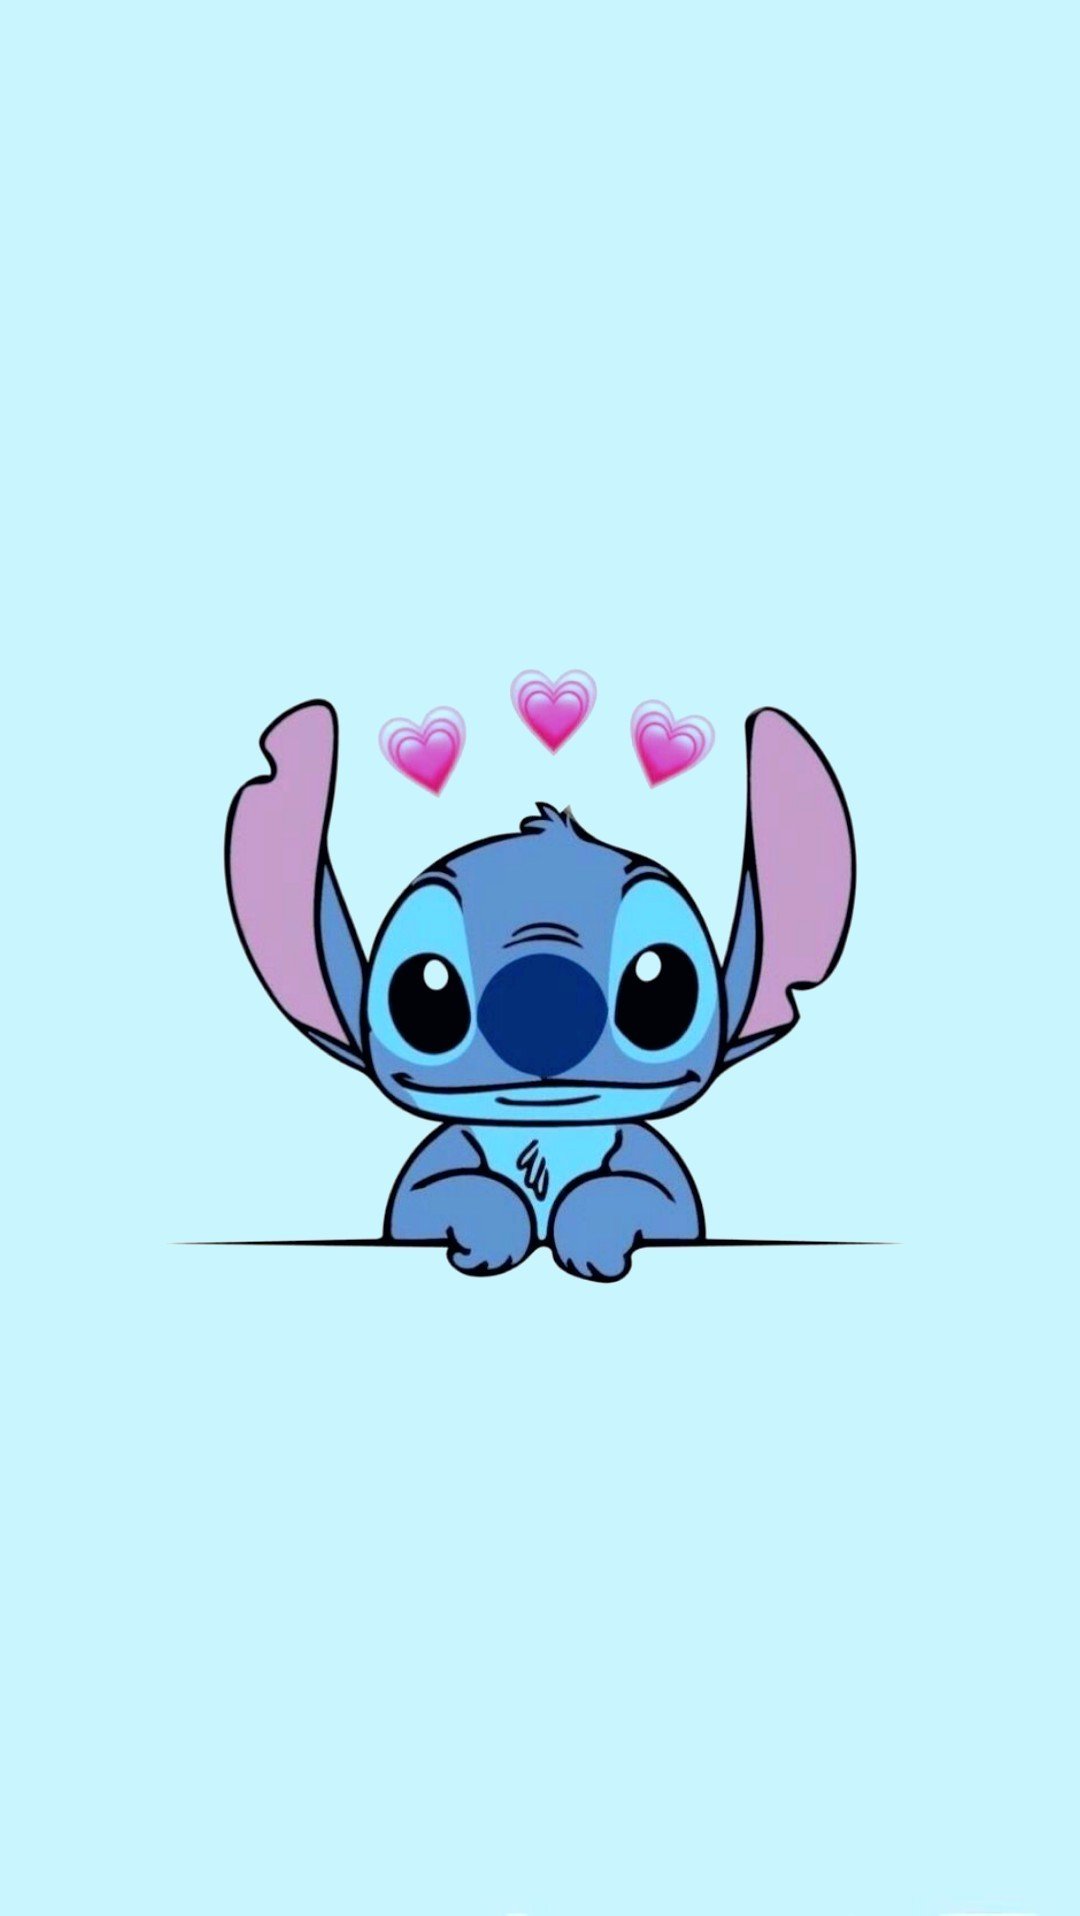 Christmas stitch wallpaper by IgnoreMe123  Download on ZEDGE  2ba0